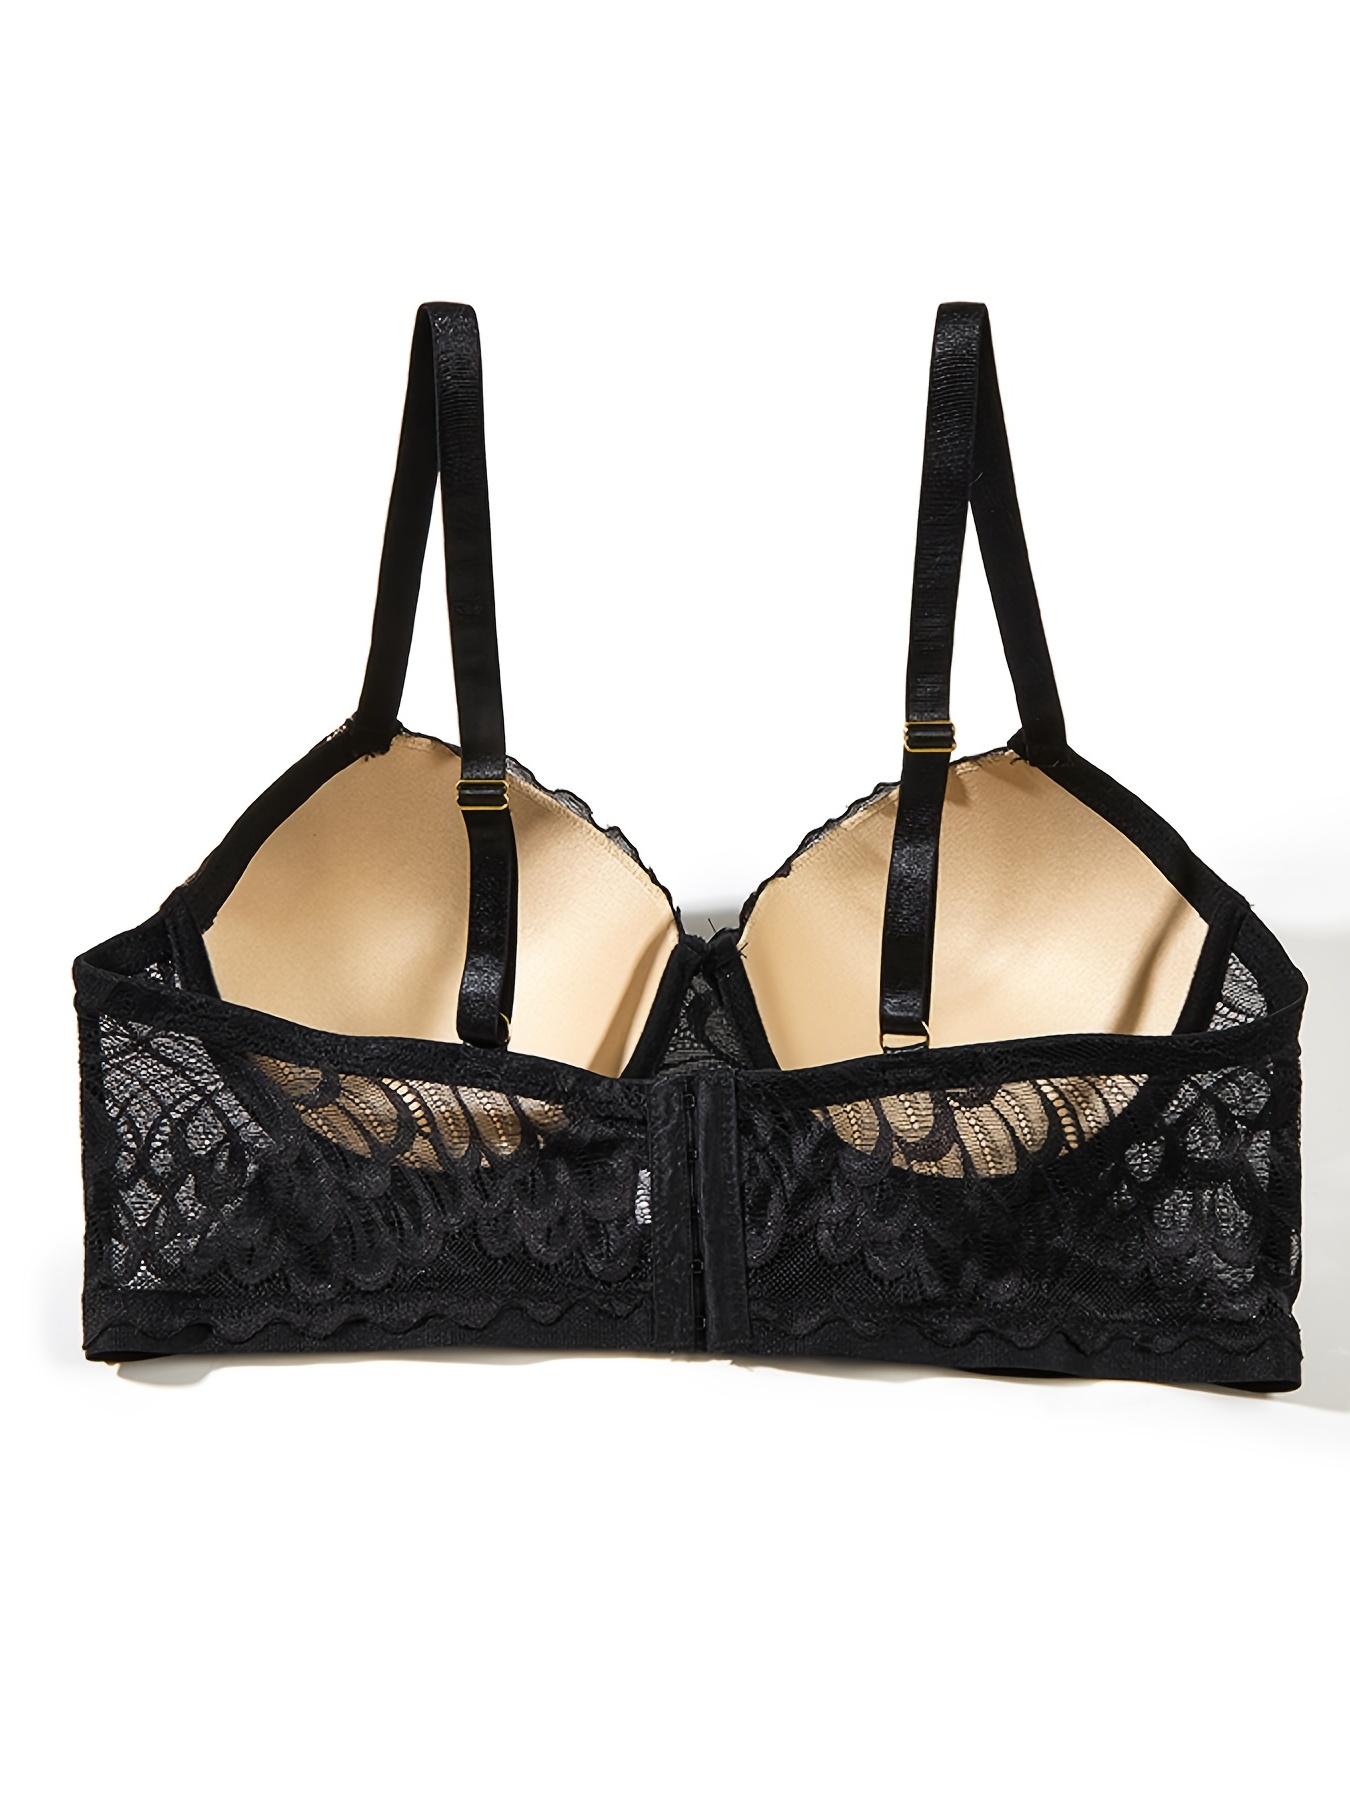 Lacy Jacquard Half Padded Underwired Full Cup Bra - Women